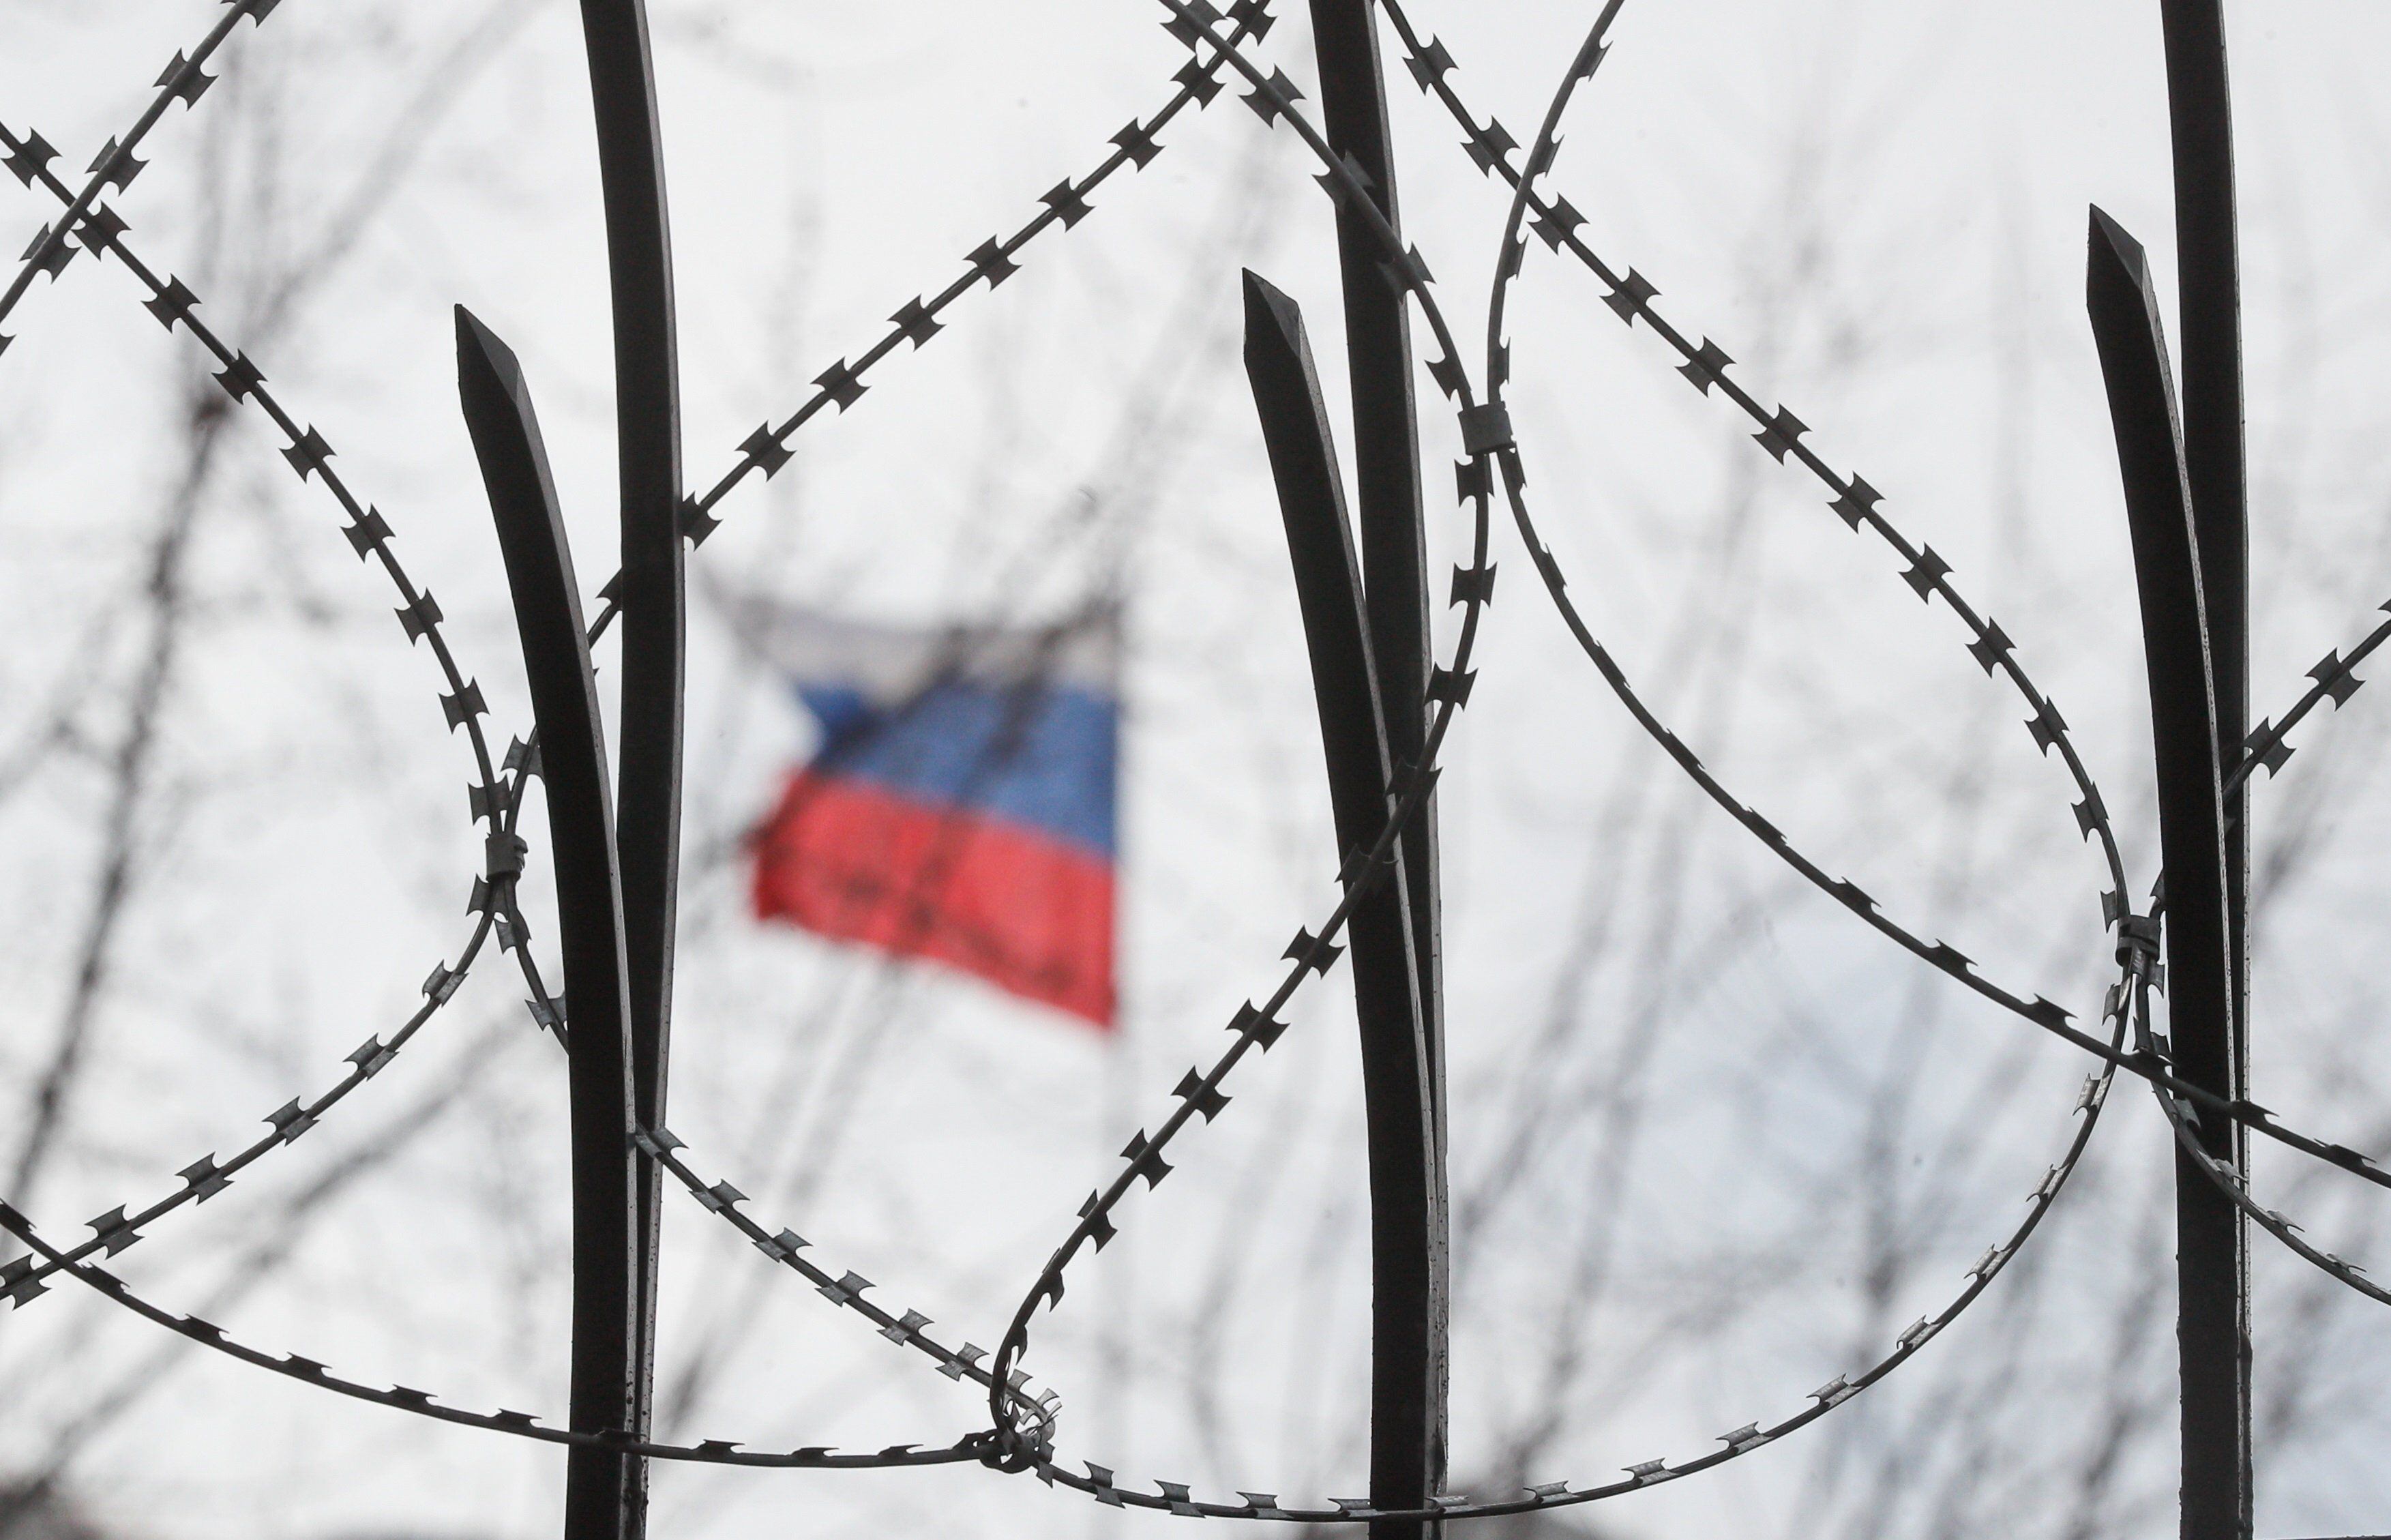 Russia announces entry of its troops into pro-Russian separatist territories of Ukraine